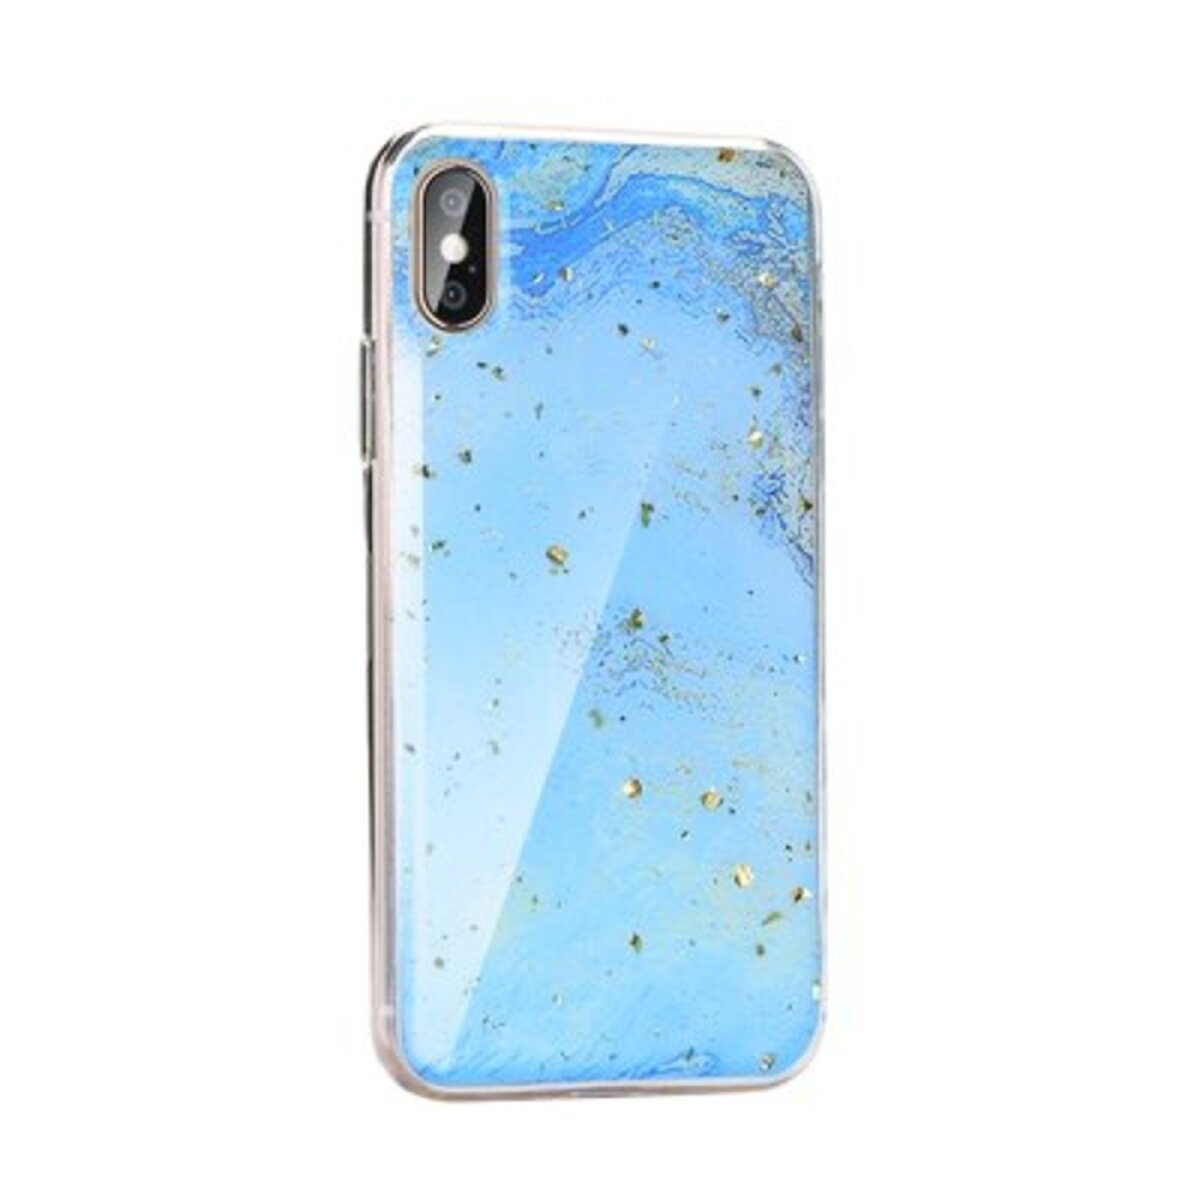 3, FORCELL Galaxy MARBLE Bookcover, A40 A40, design Not available Case Galaxy Samsung,